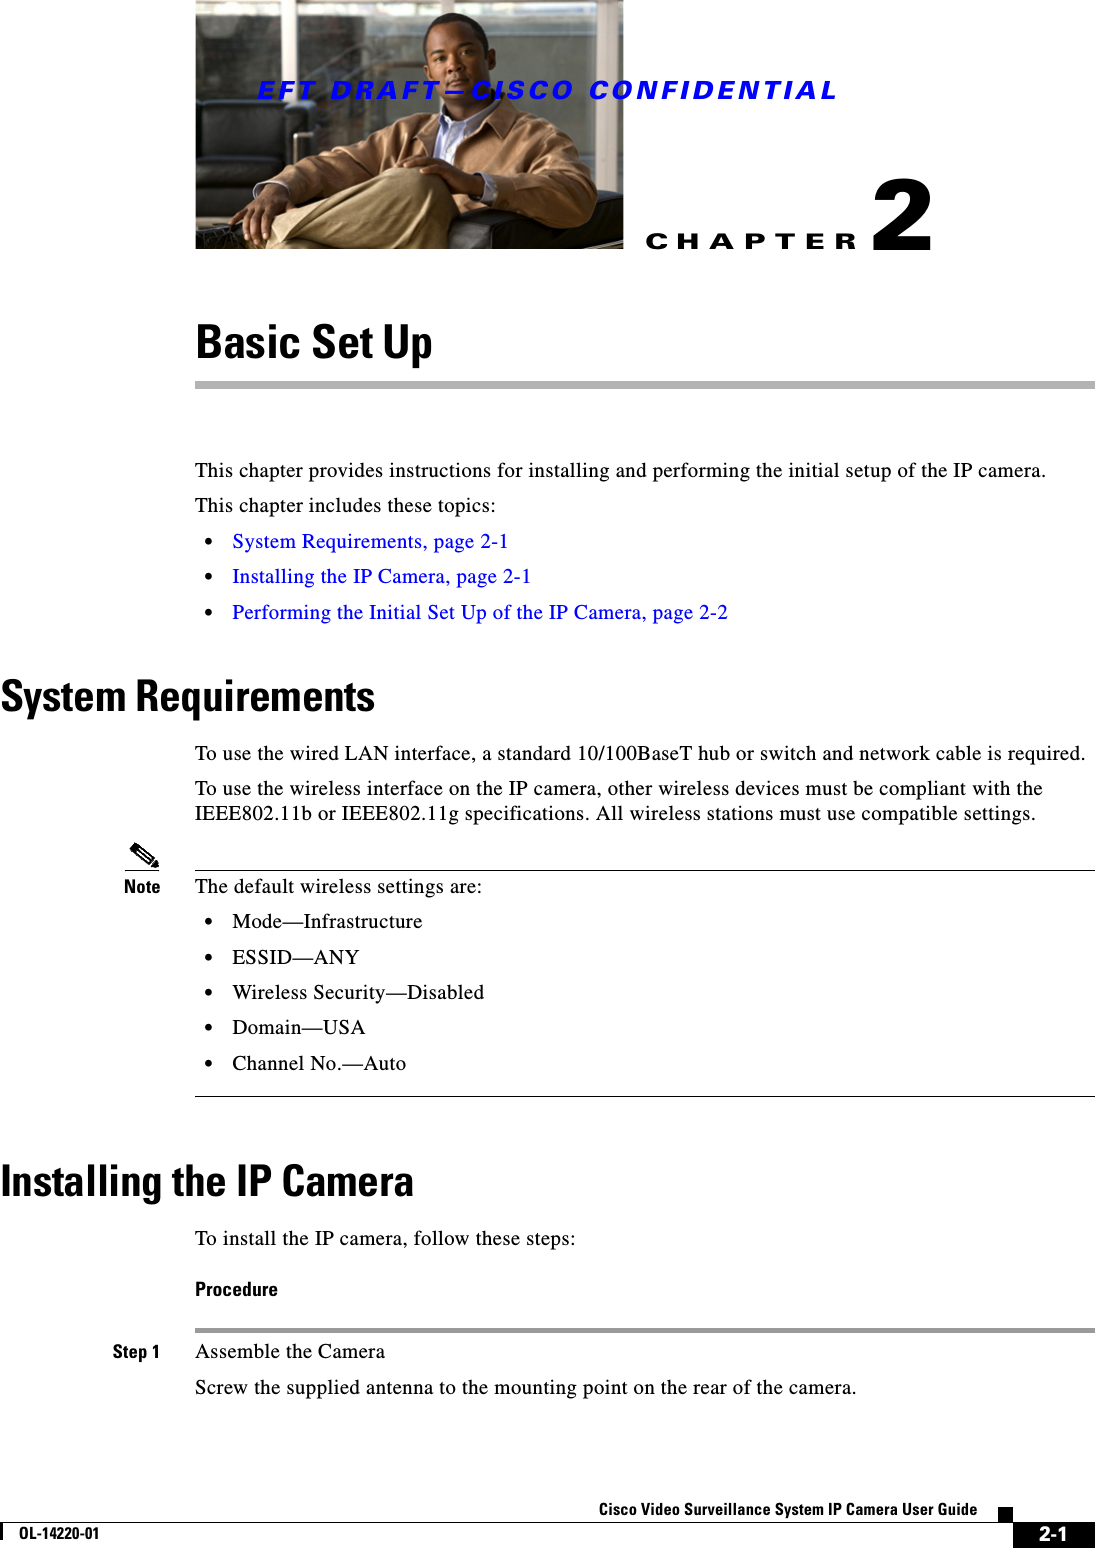 CHAPTEREFT DRAFT—CISCO CONFIDENTIAL2-1Cisco Video Surveillance System IP Camera User GuideOL-14220-012Basic Set UpThis chapter provides instructions for installing and performing the initial setup of the IP camera.This chapter includes these topics:•System Requirements, page 2-1•Installing the IP Camera, page 2-1•Performing the Initial Set Up of the IP Camera, page 2-2System RequirementsTo use the wired LAN interface, a standard 10/100BaseT hub or switch and network cable is required. To use the wireless interface on the IP camera, other wireless devices must be compliant with the IEEE802.11b or IEEE802.11g specifications. All wireless stations must use compatible settings.Note The default wireless settings are:•Mode—Infrastructure•ESSID—ANY •Wireless Security—Disabled•Domain—USA•Channel No.—AutoInstalling the IP CameraTo install the IP camera, follow these steps:ProcedureStep 1 Assemble the CameraScrew the supplied antenna to the mounting point on the rear of the camera.